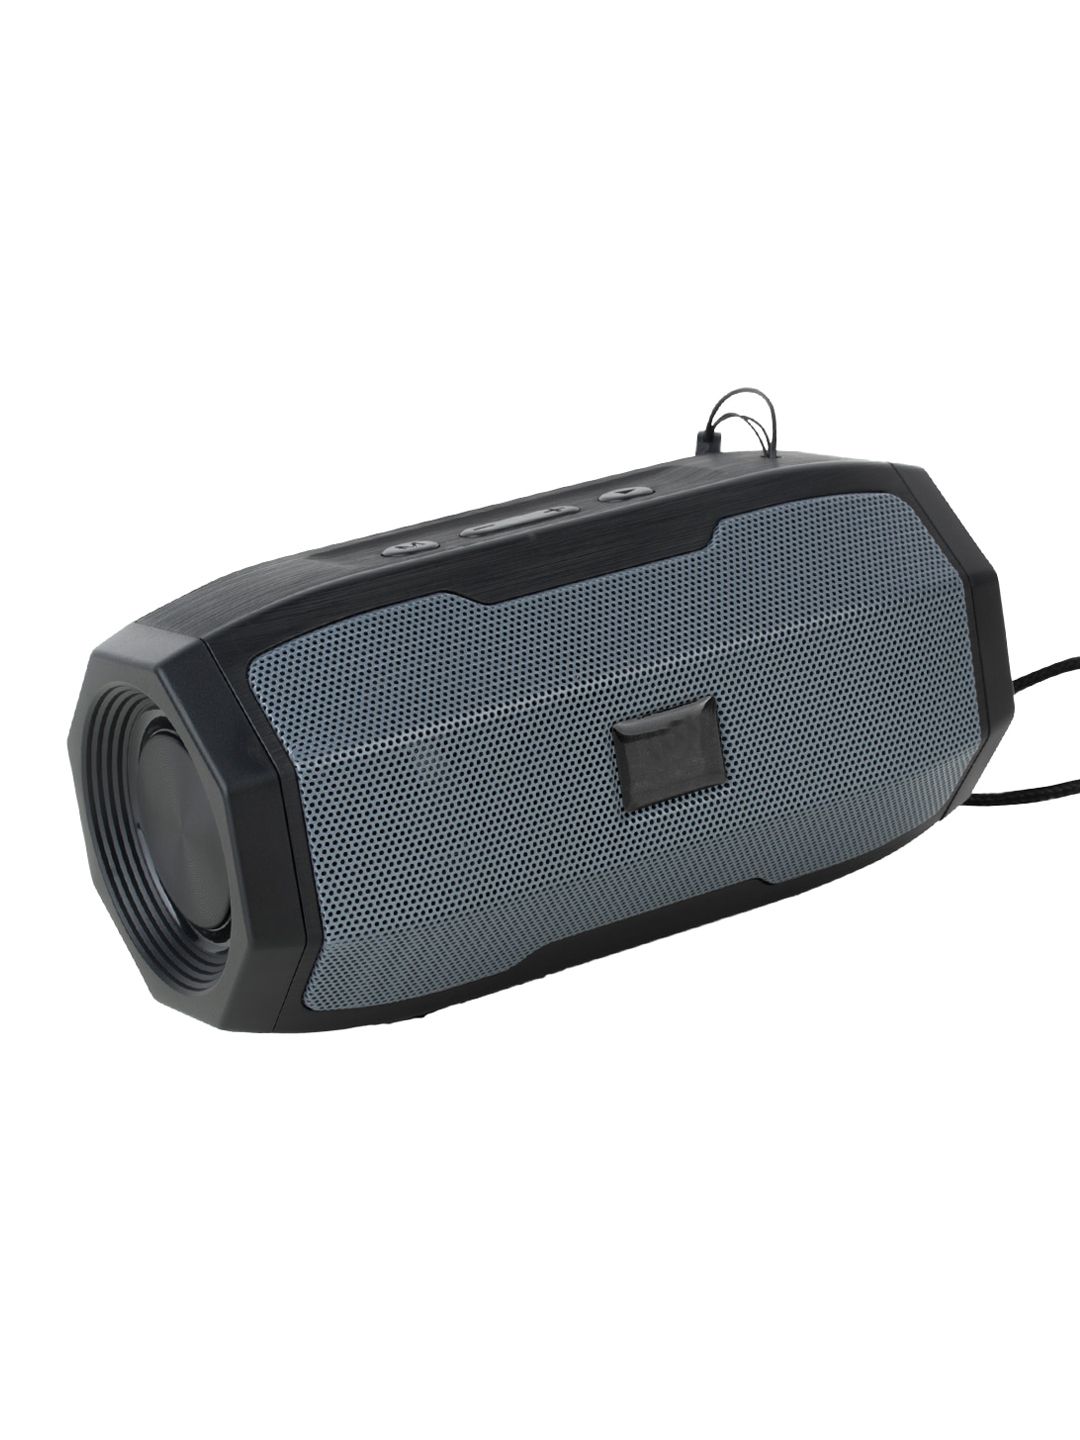 GIZMORE Black & Blue GIZ MS505 Ultra Pocket Melody Portable BT Speaker with TWS Function Price in India